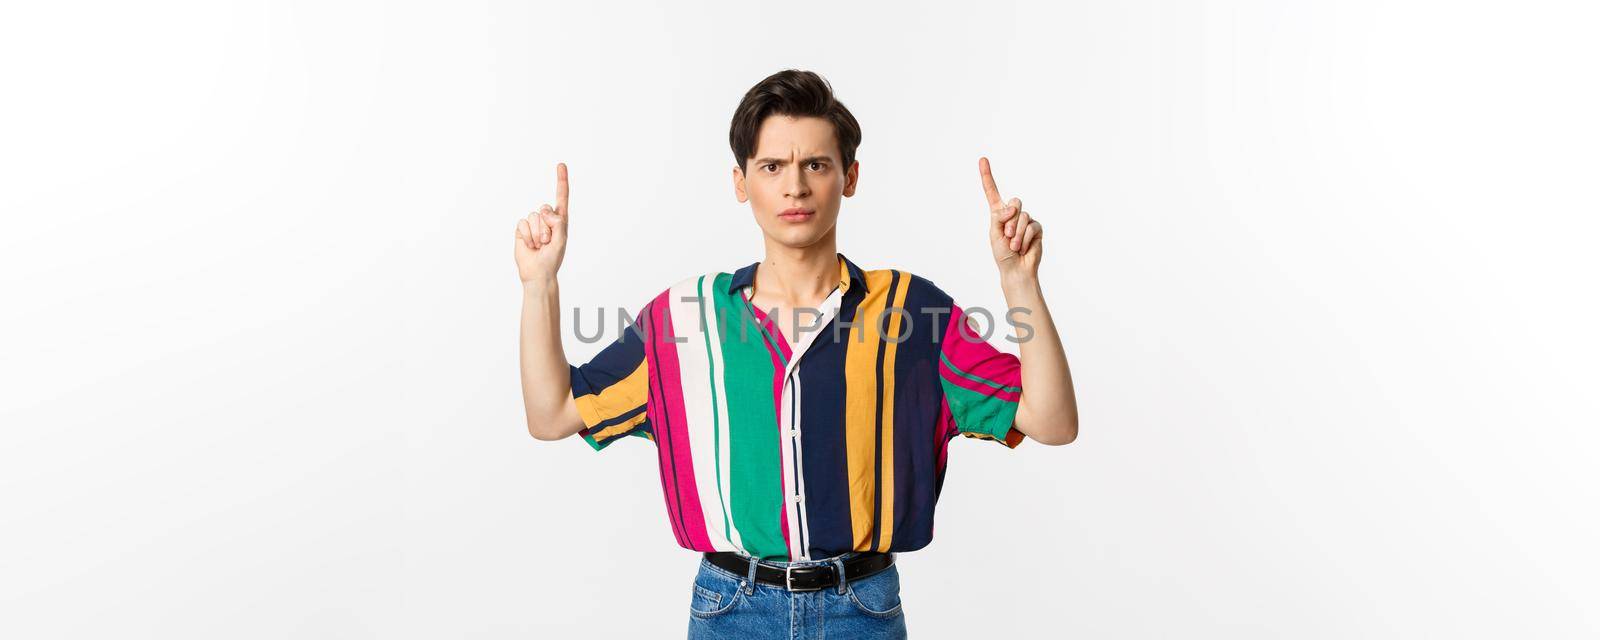 Disappointed and angry man pointing fingers up, showing something bad, standing over white background. Copy space